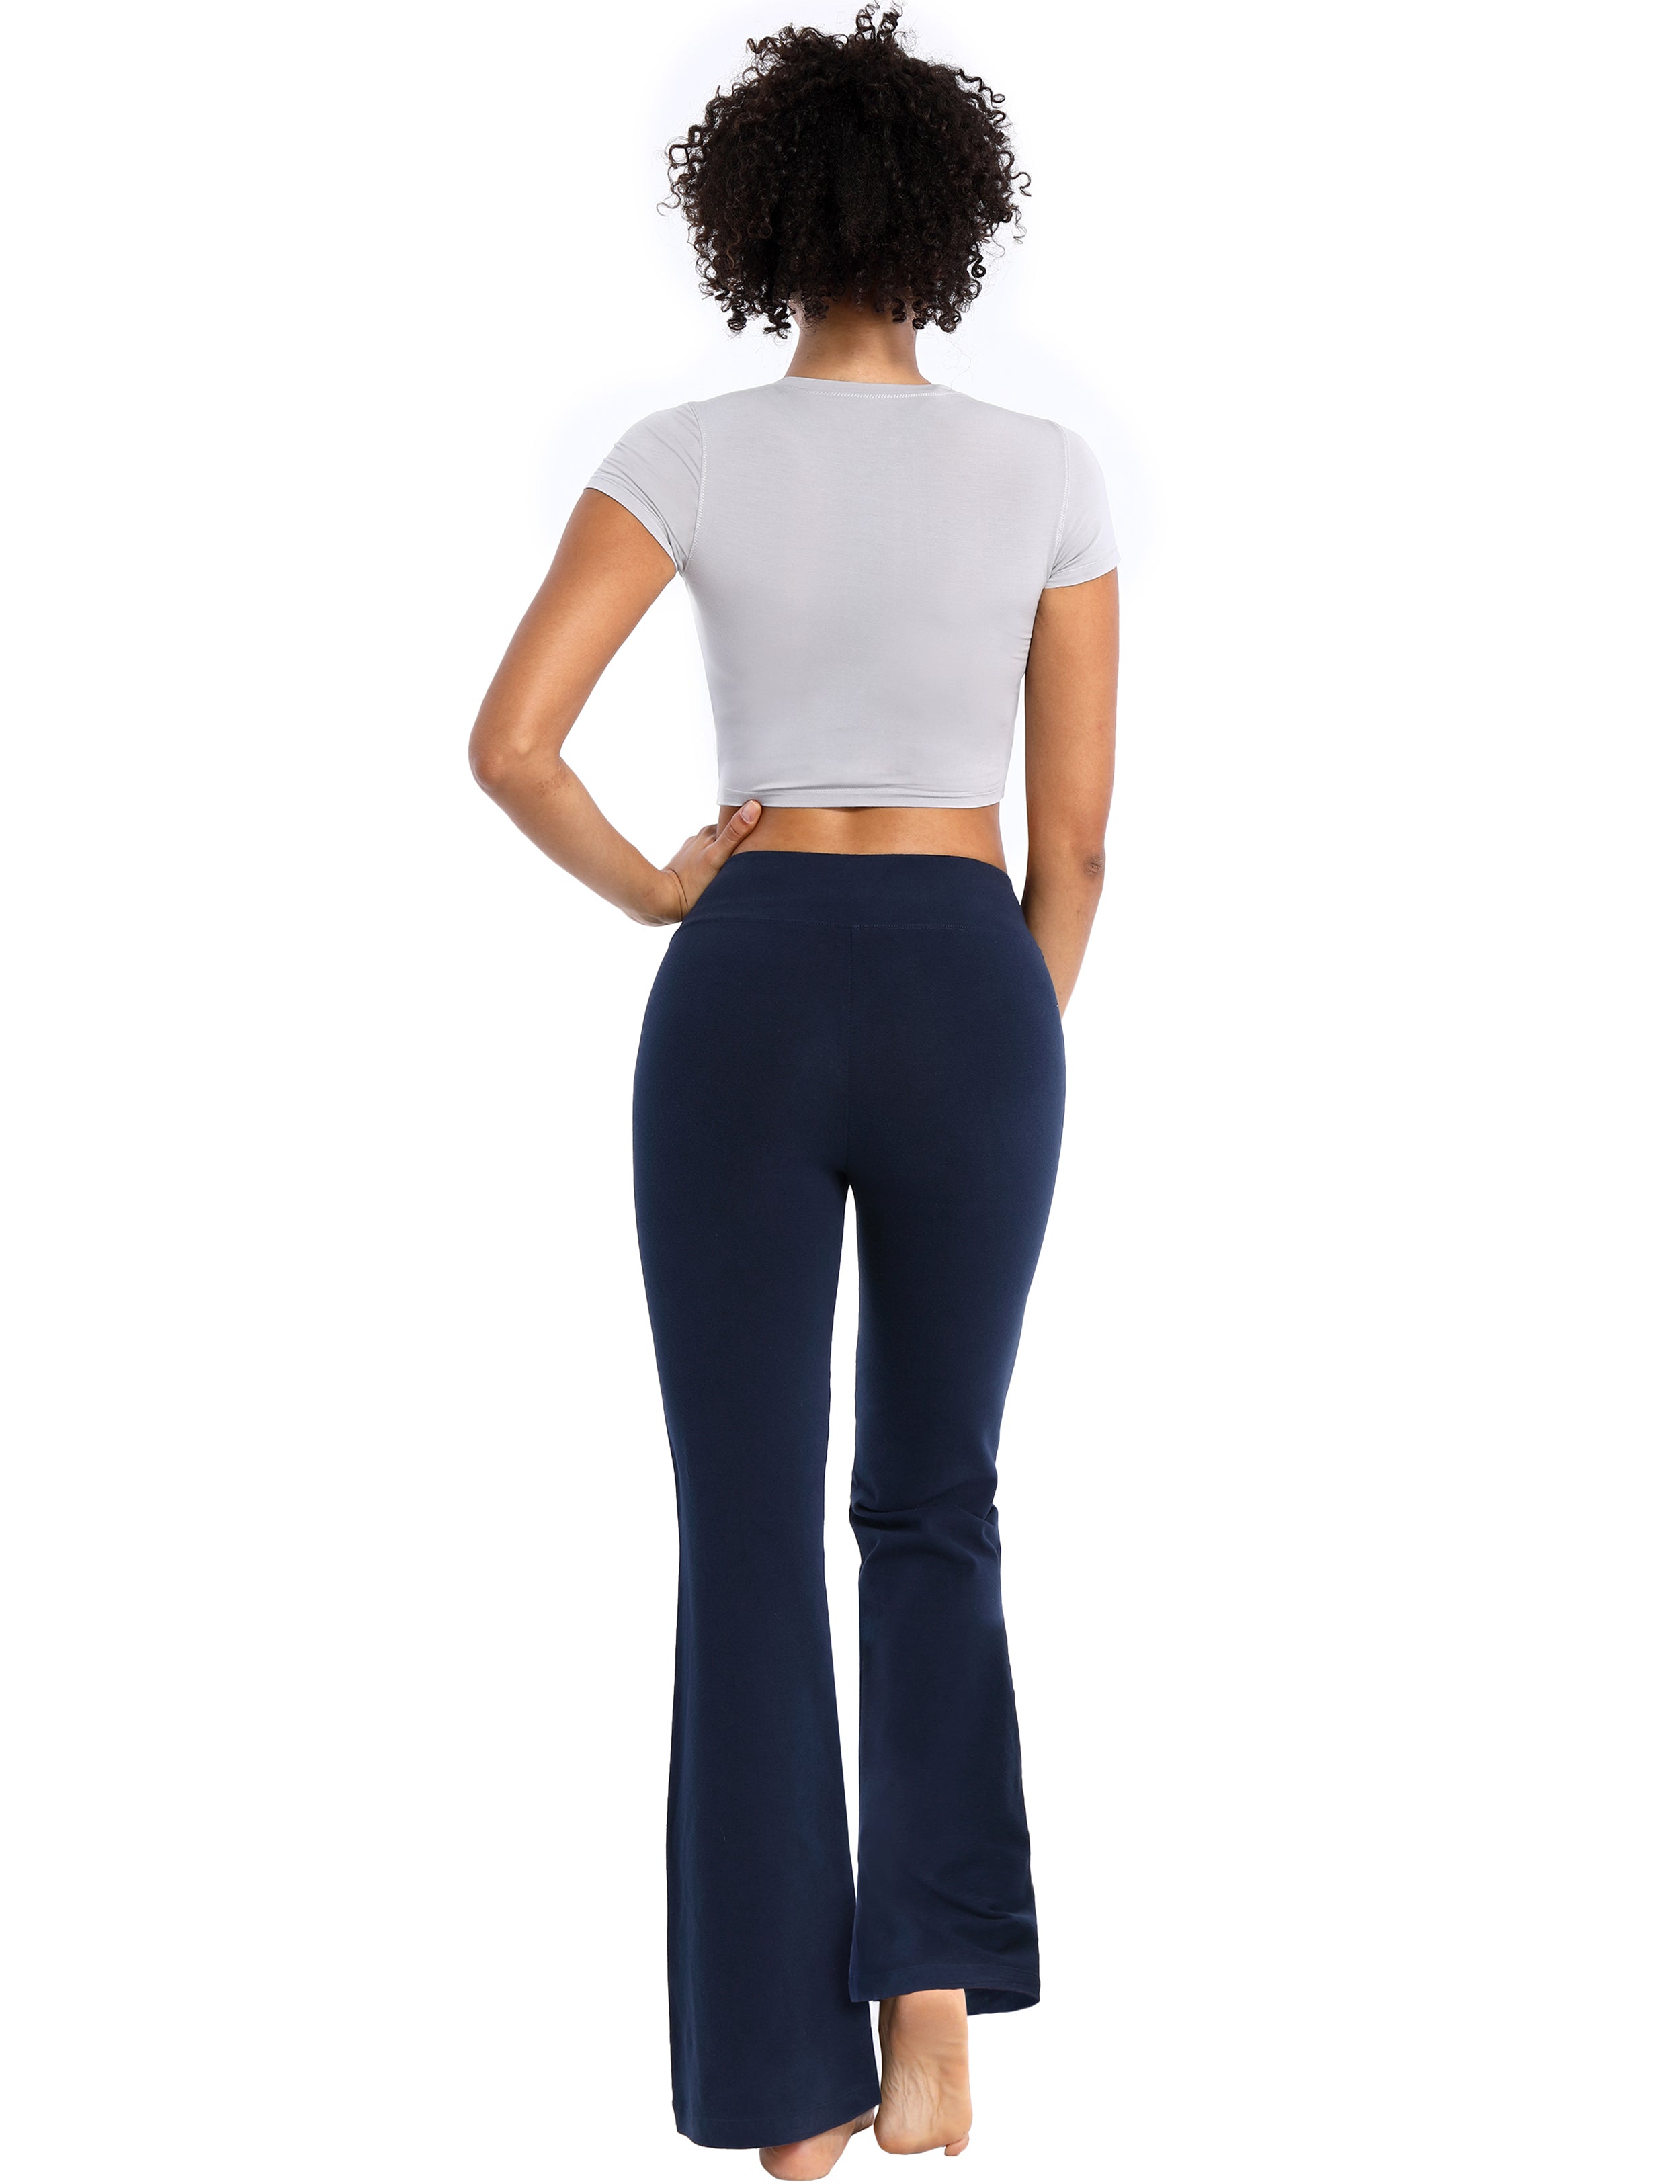 Cotton Bootcut Leggings darknavy 90%Cotton/10%Spandex (soft and cotton feel) Fabric doesn't attract lint easily 4-way stretch No see-through Moisture-wicking Inner pocket Four lengths